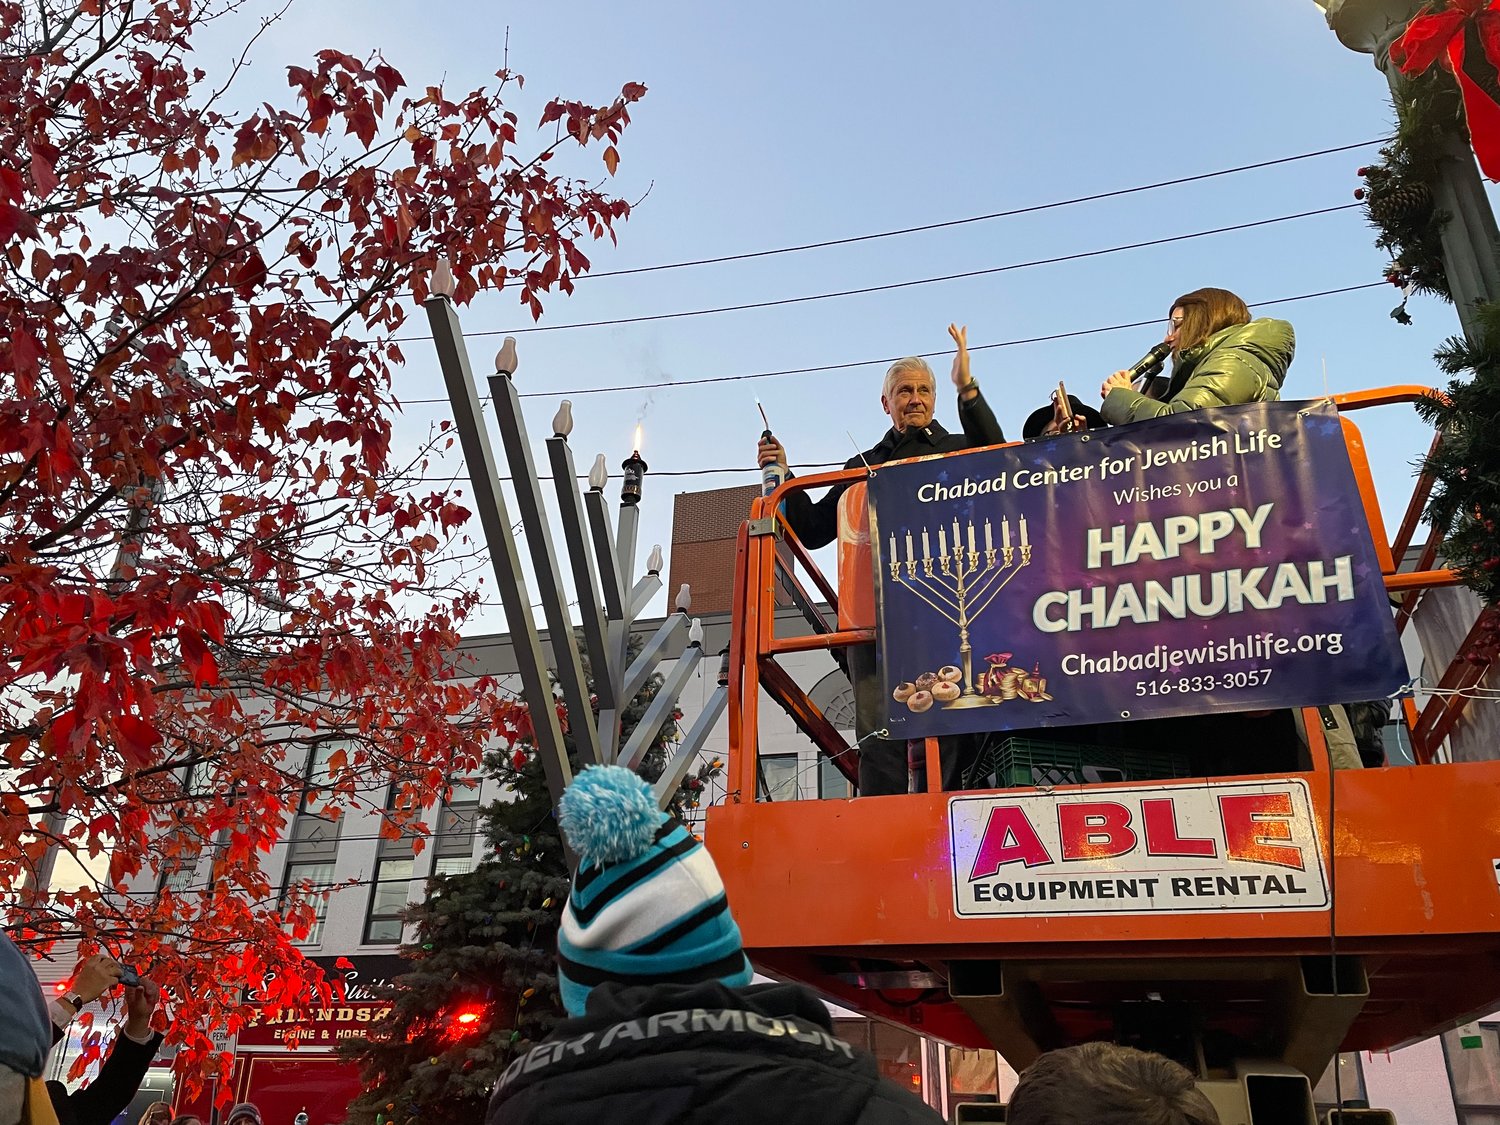 County Executive-elect Bruce Blakeman was given the honor of lighting the shamash, the candle in the center of the menorah.